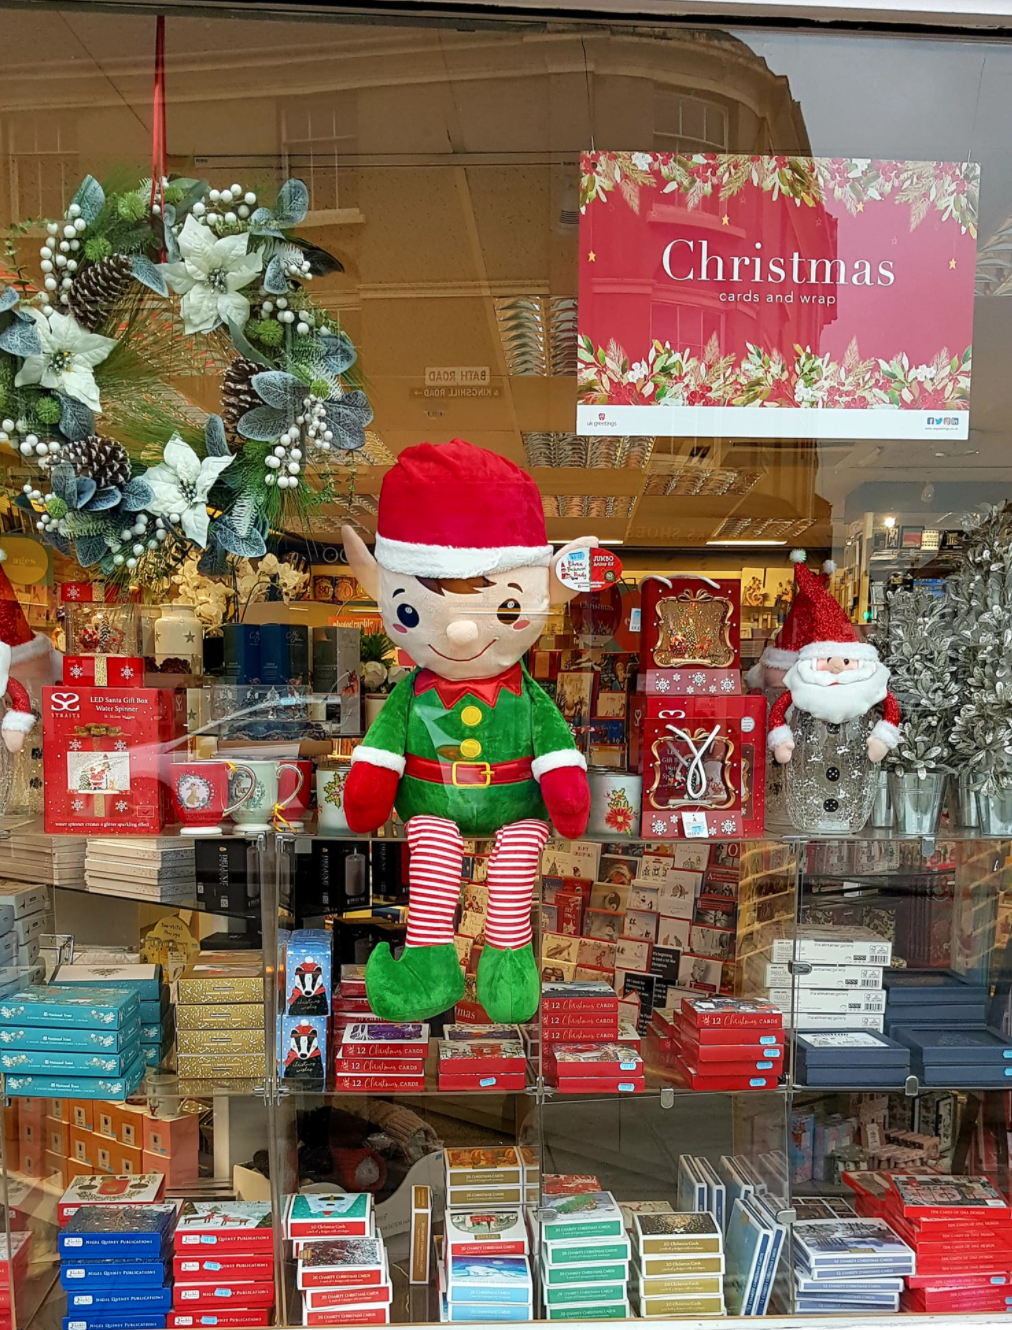 Above: A cheeky elf has worked his way into this Expressions window!